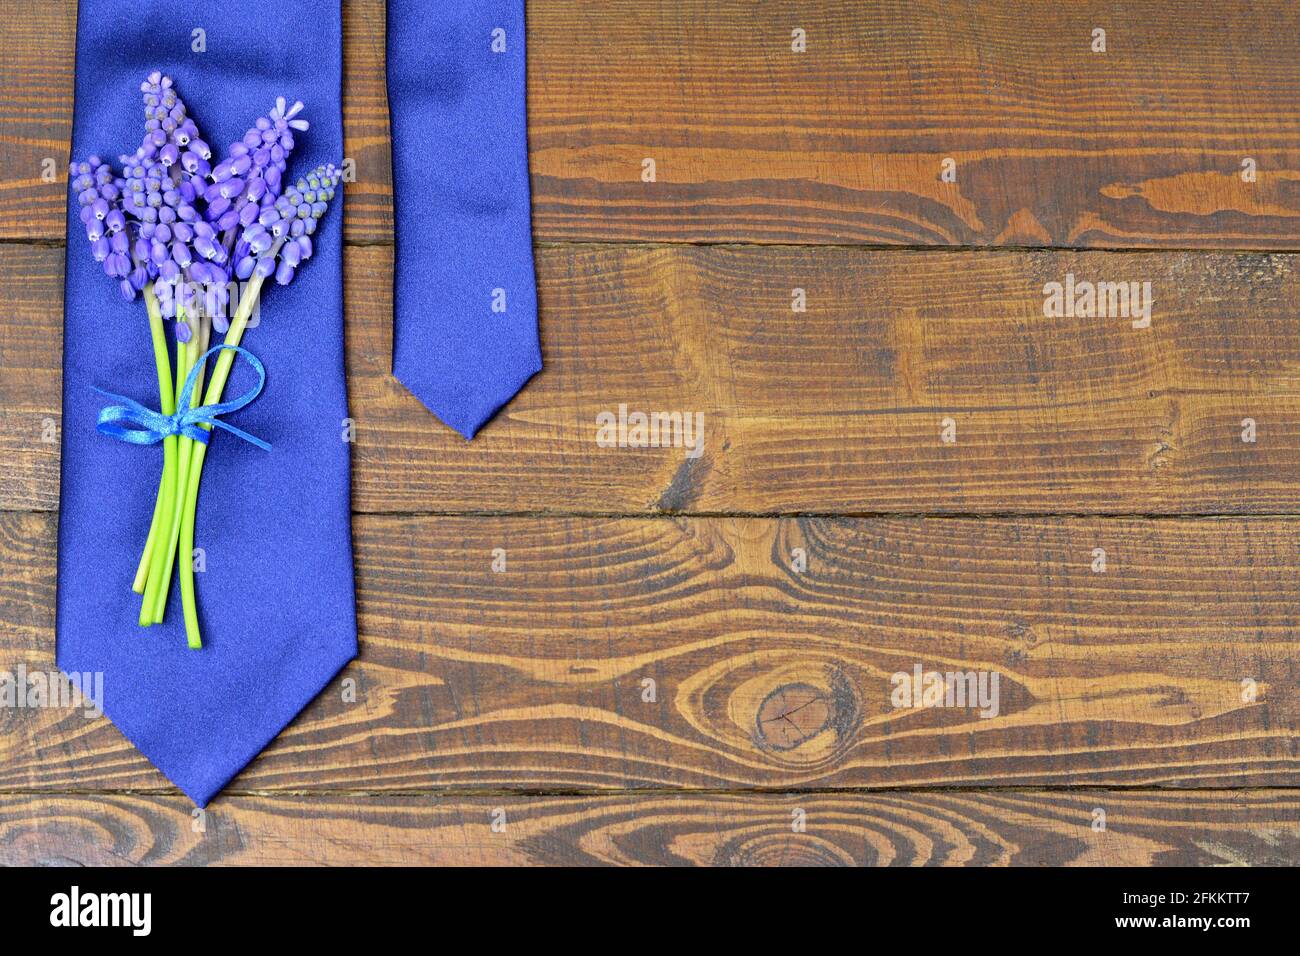 Fathers Day background with blue tie and grape hyacinth flowers Stock Photo